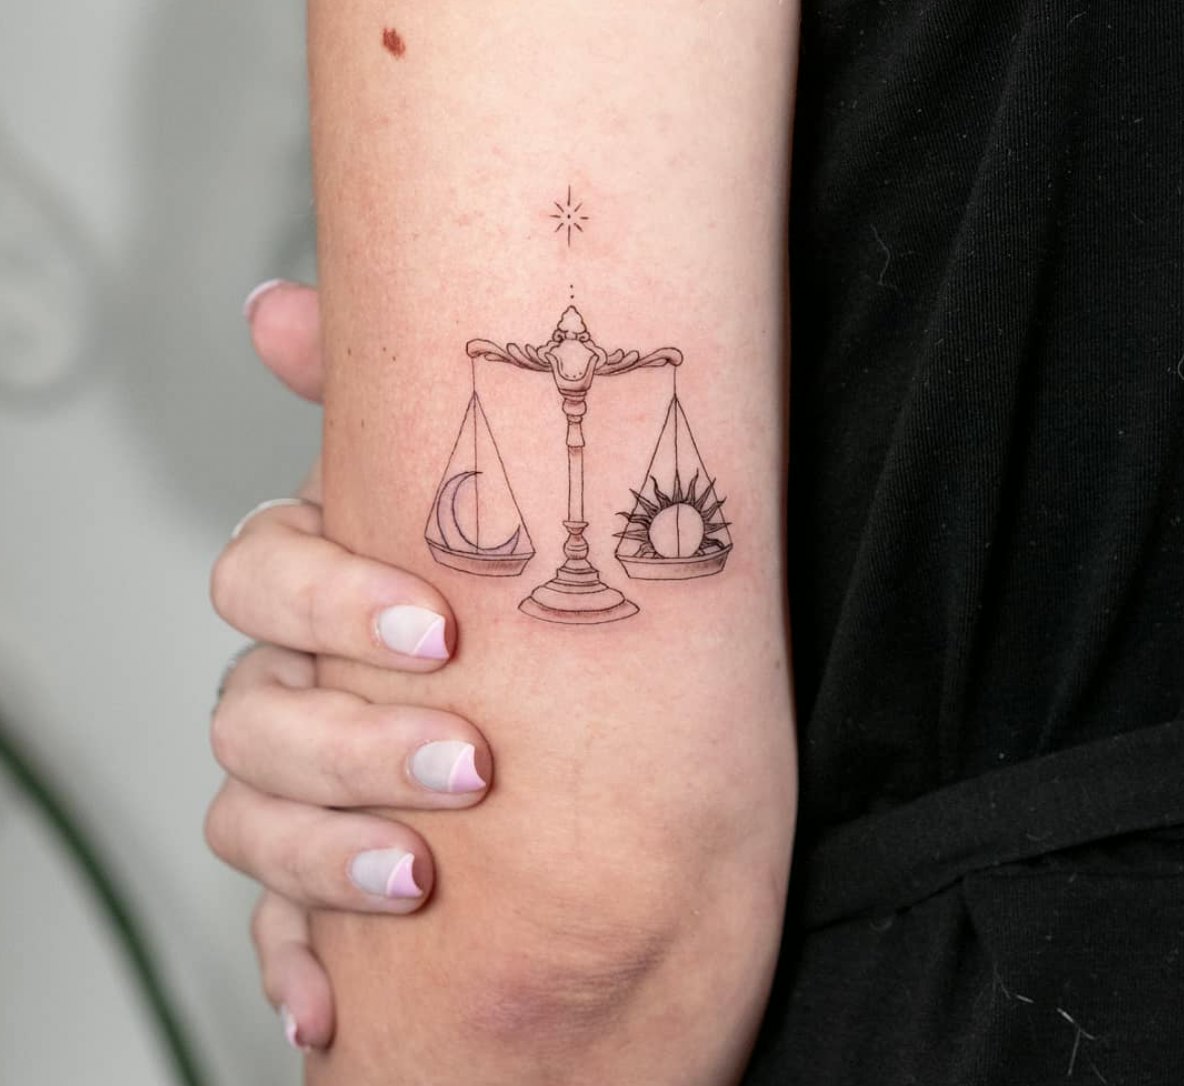 11 Libra Constellation Tattoo Ideas You Have To See To Believe  alexie